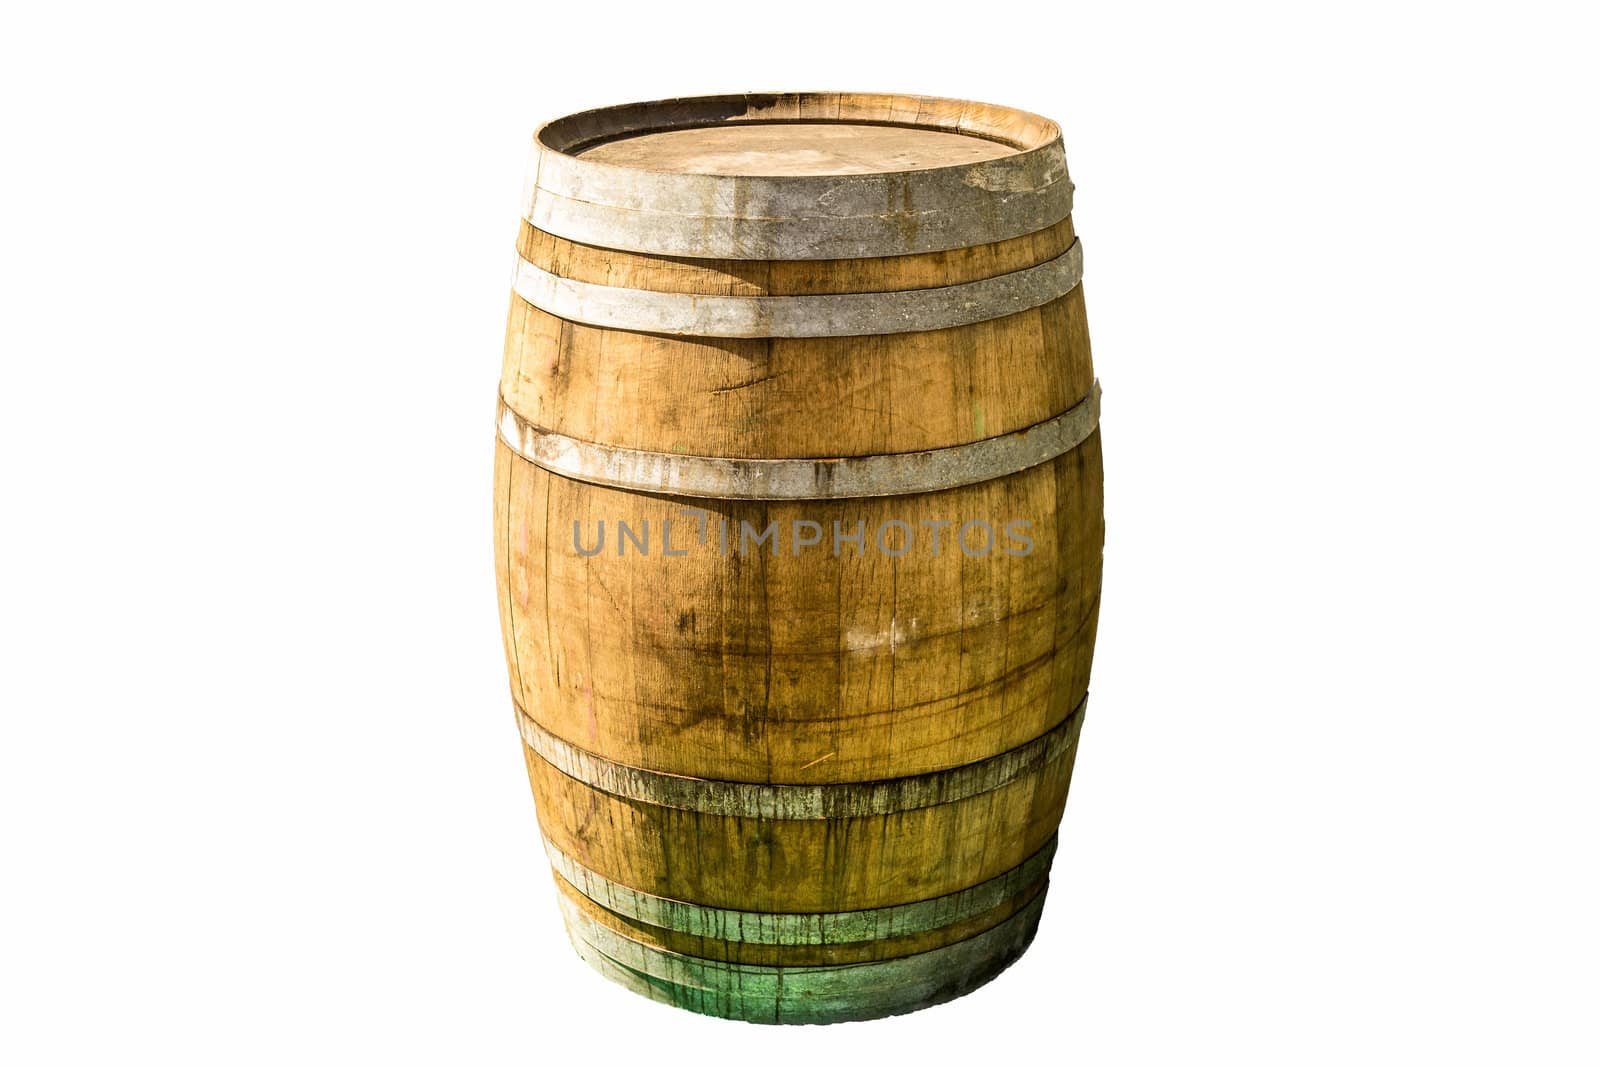 Exemplary old wooden barrel with iron rings and fixtures in front of a white clear background, isolated